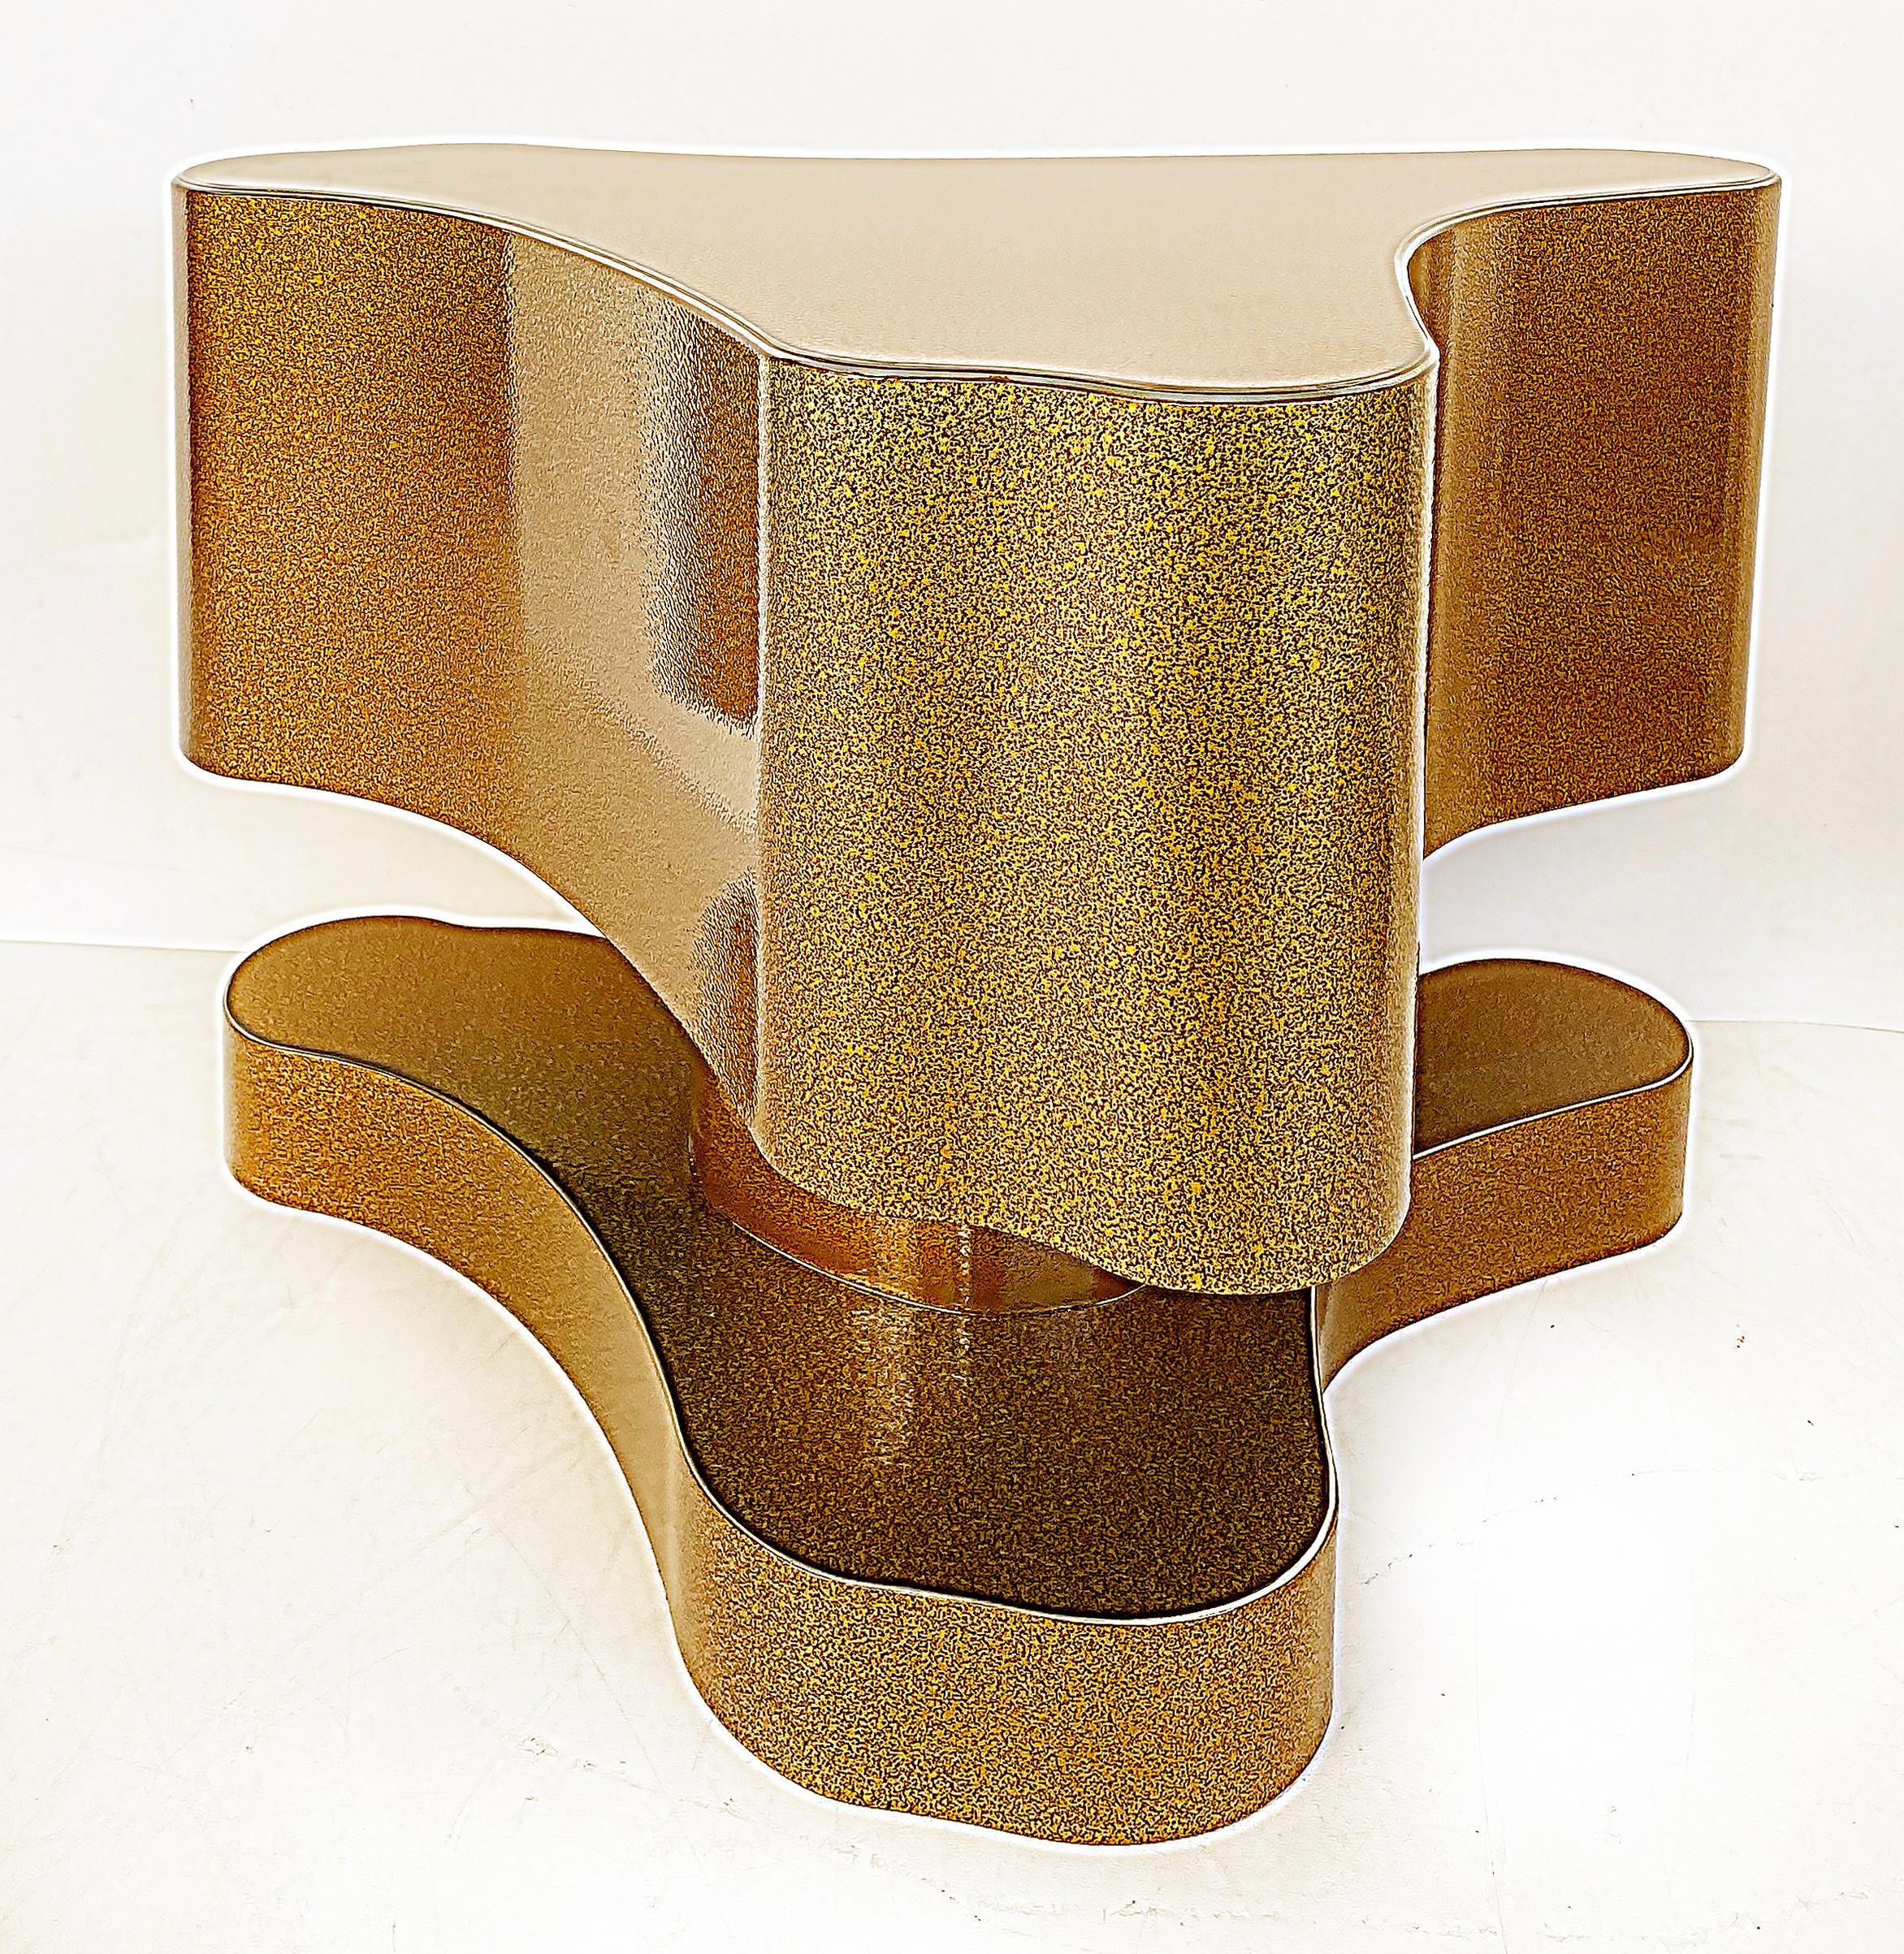 Bert Furnari Studio Free-Form Abstract Side Tables in Powder-Coated Aluminum In New Condition For Sale In Miami, FL